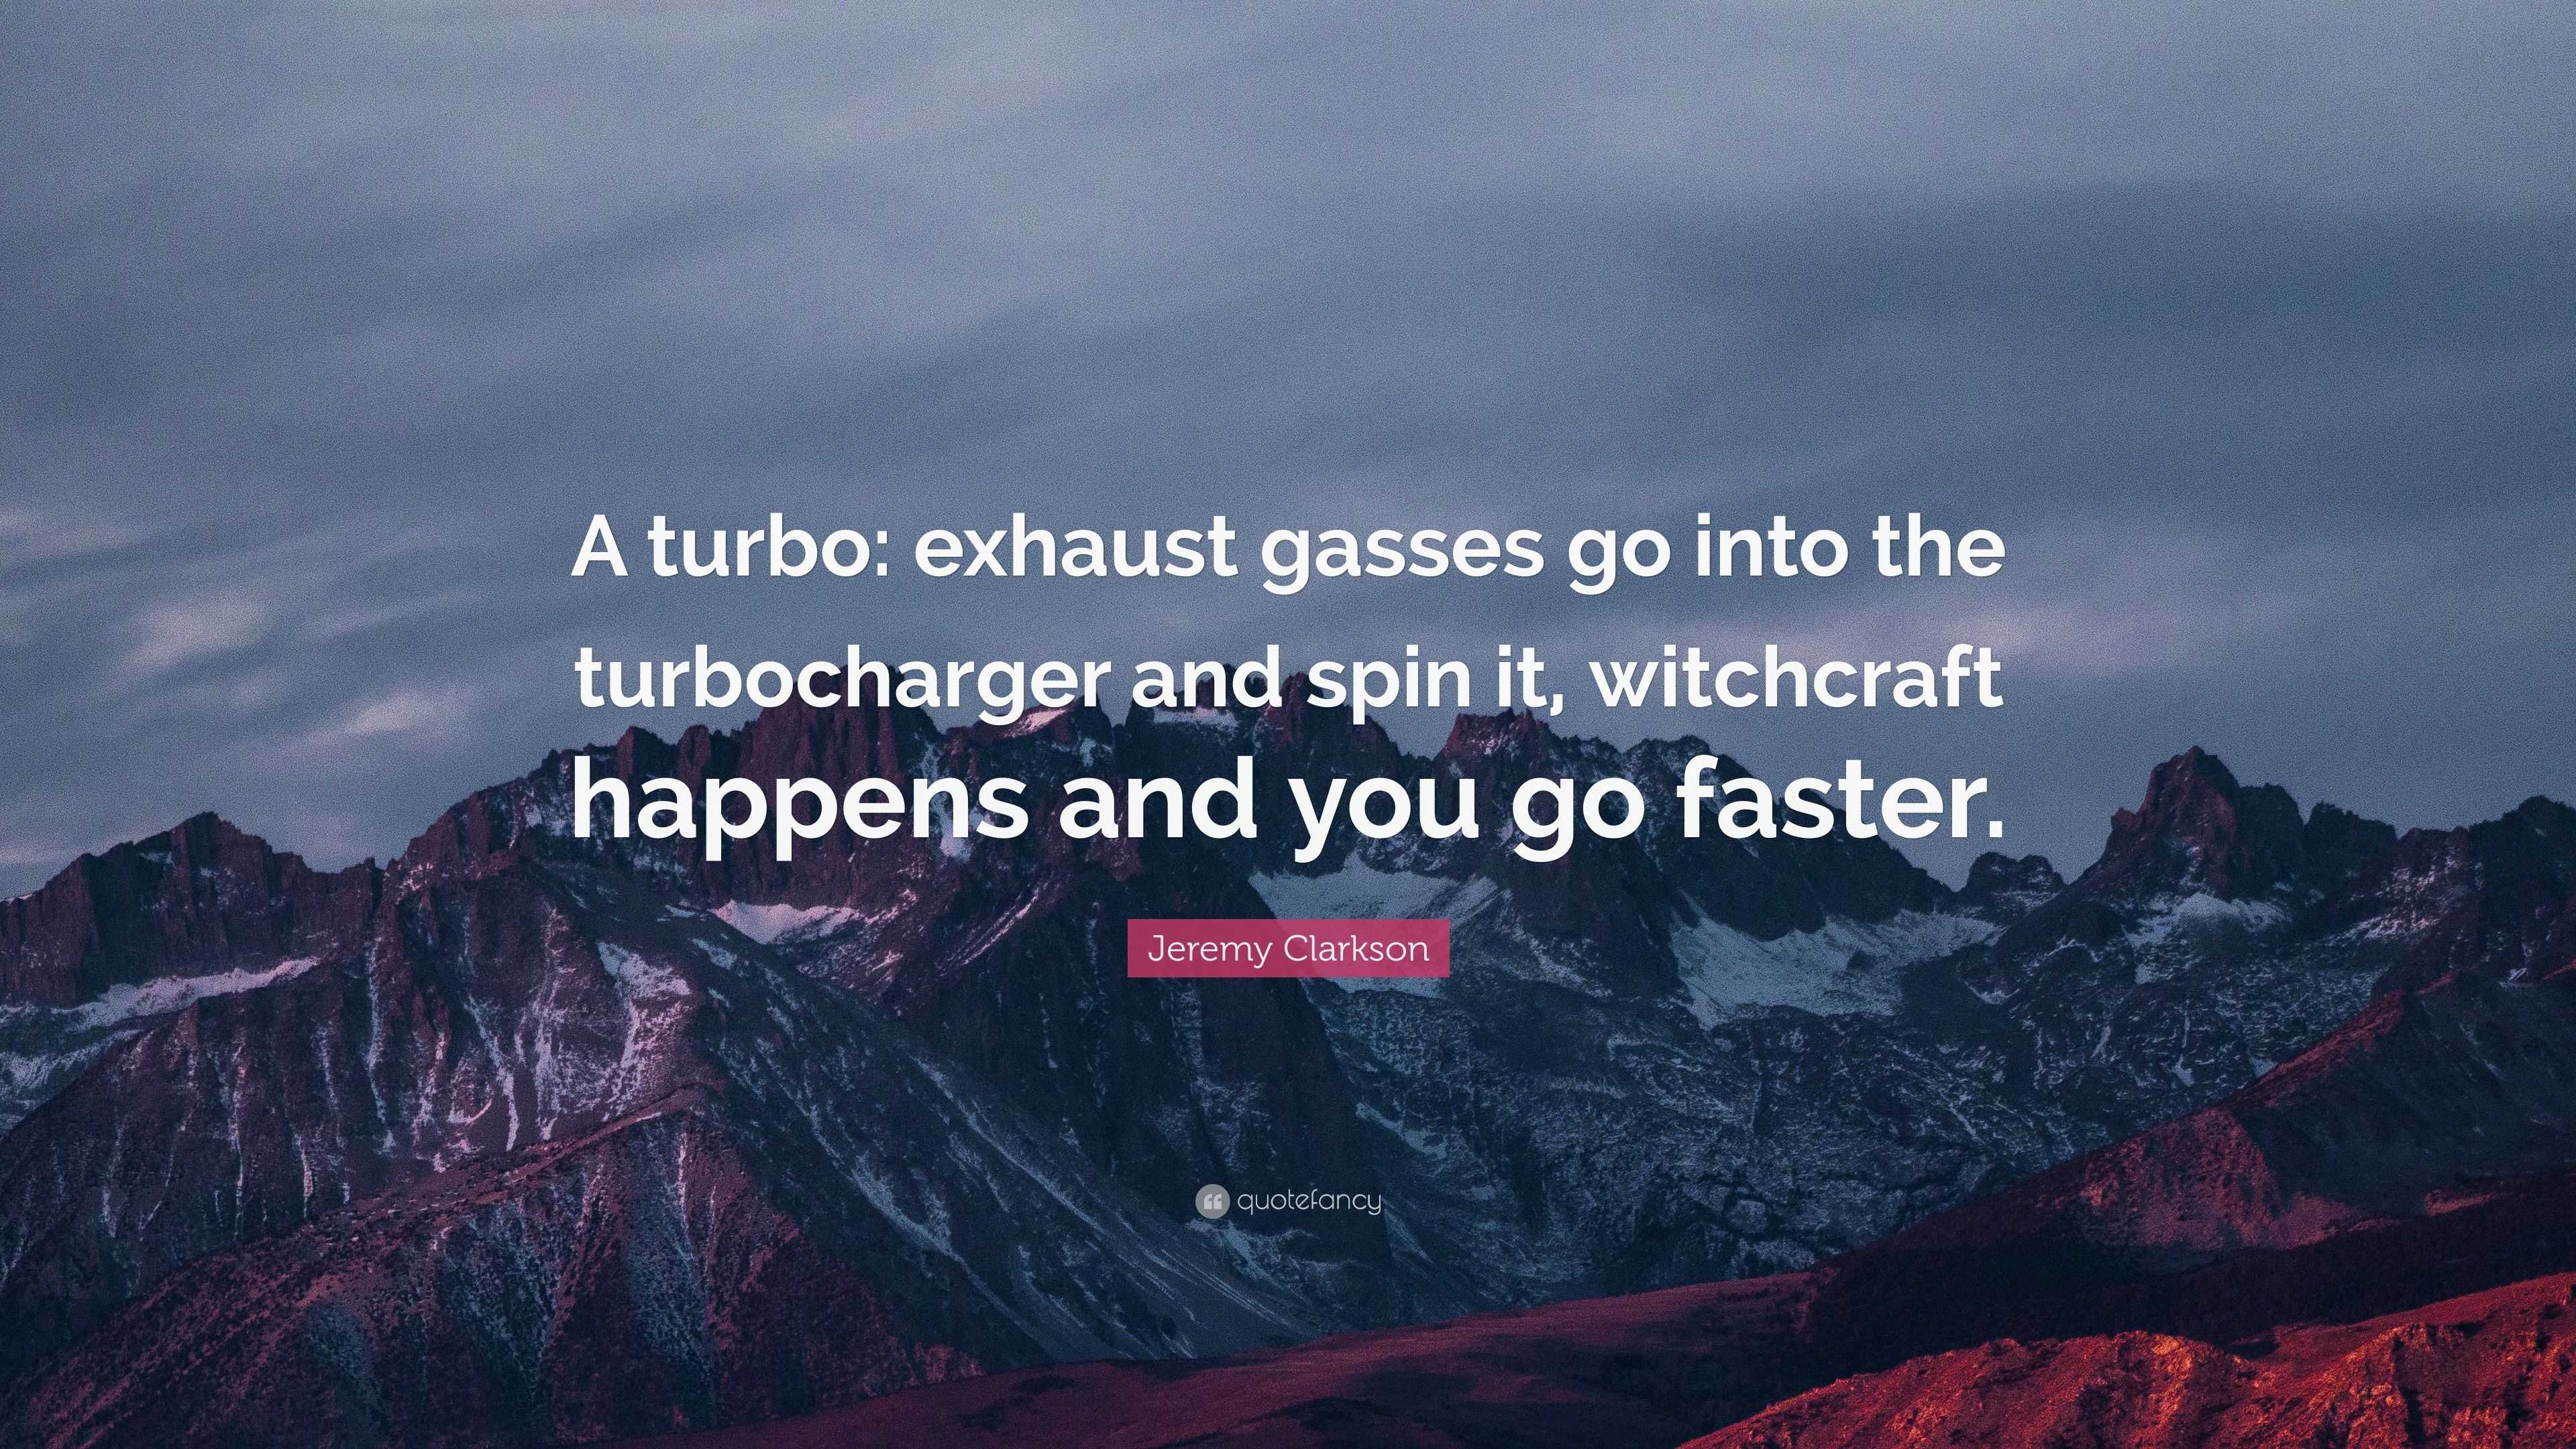 Jeremy Clarkson Quote A Turbo Exhaust Gasses Go Into The Turbocharger And Spin It Witchcraft Happens